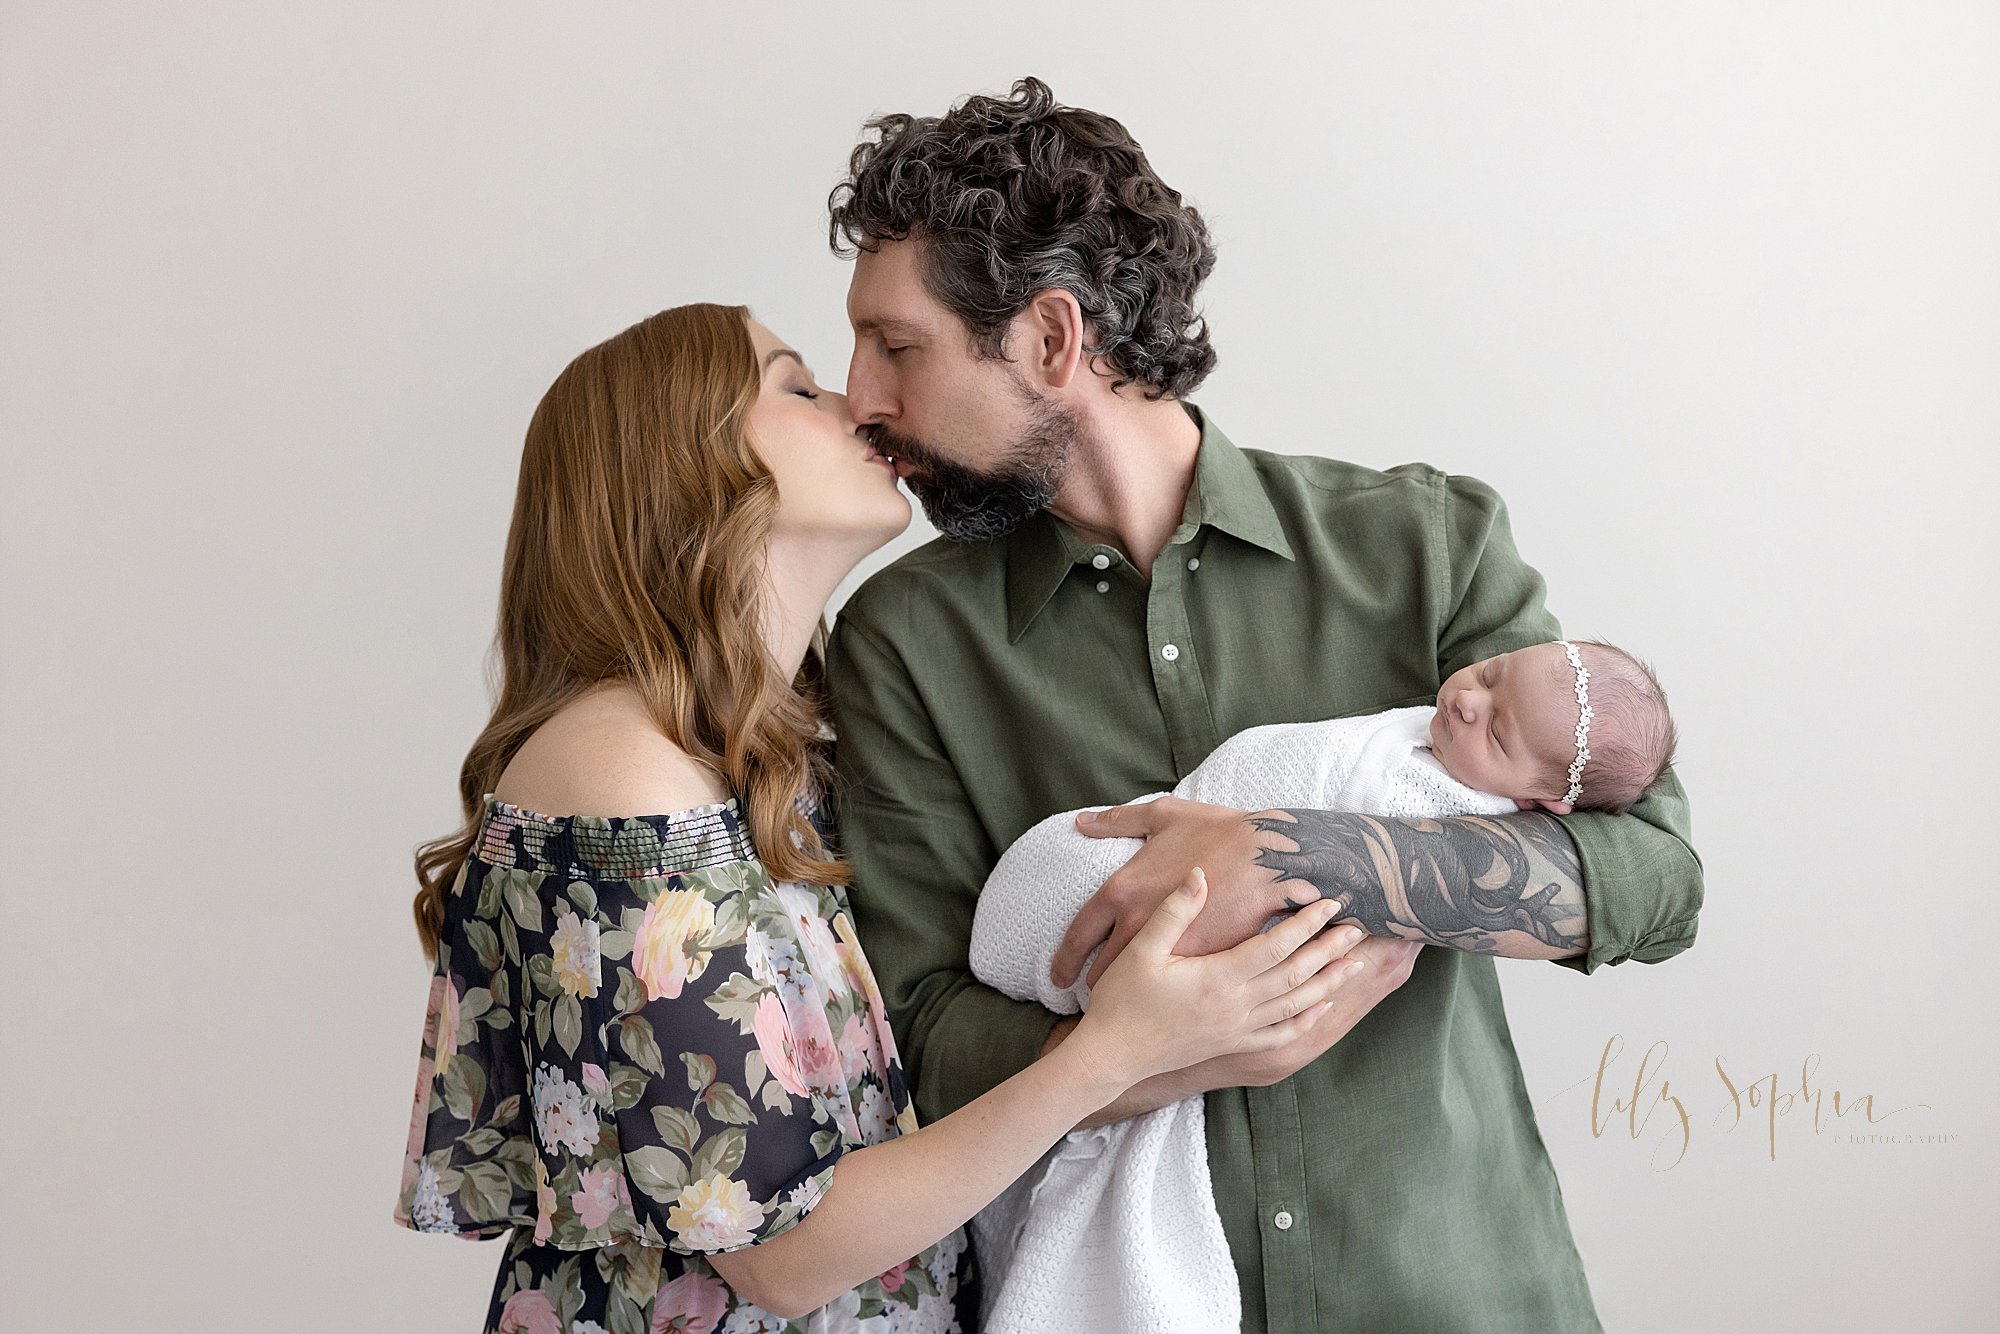  Family newborn photo of a father cradling his peacefully sleeping infant daughter in his arms as he looks over his right shoulder and kisses his wife who is standing next to him in the natural light photography studio located near Morningside in Atl